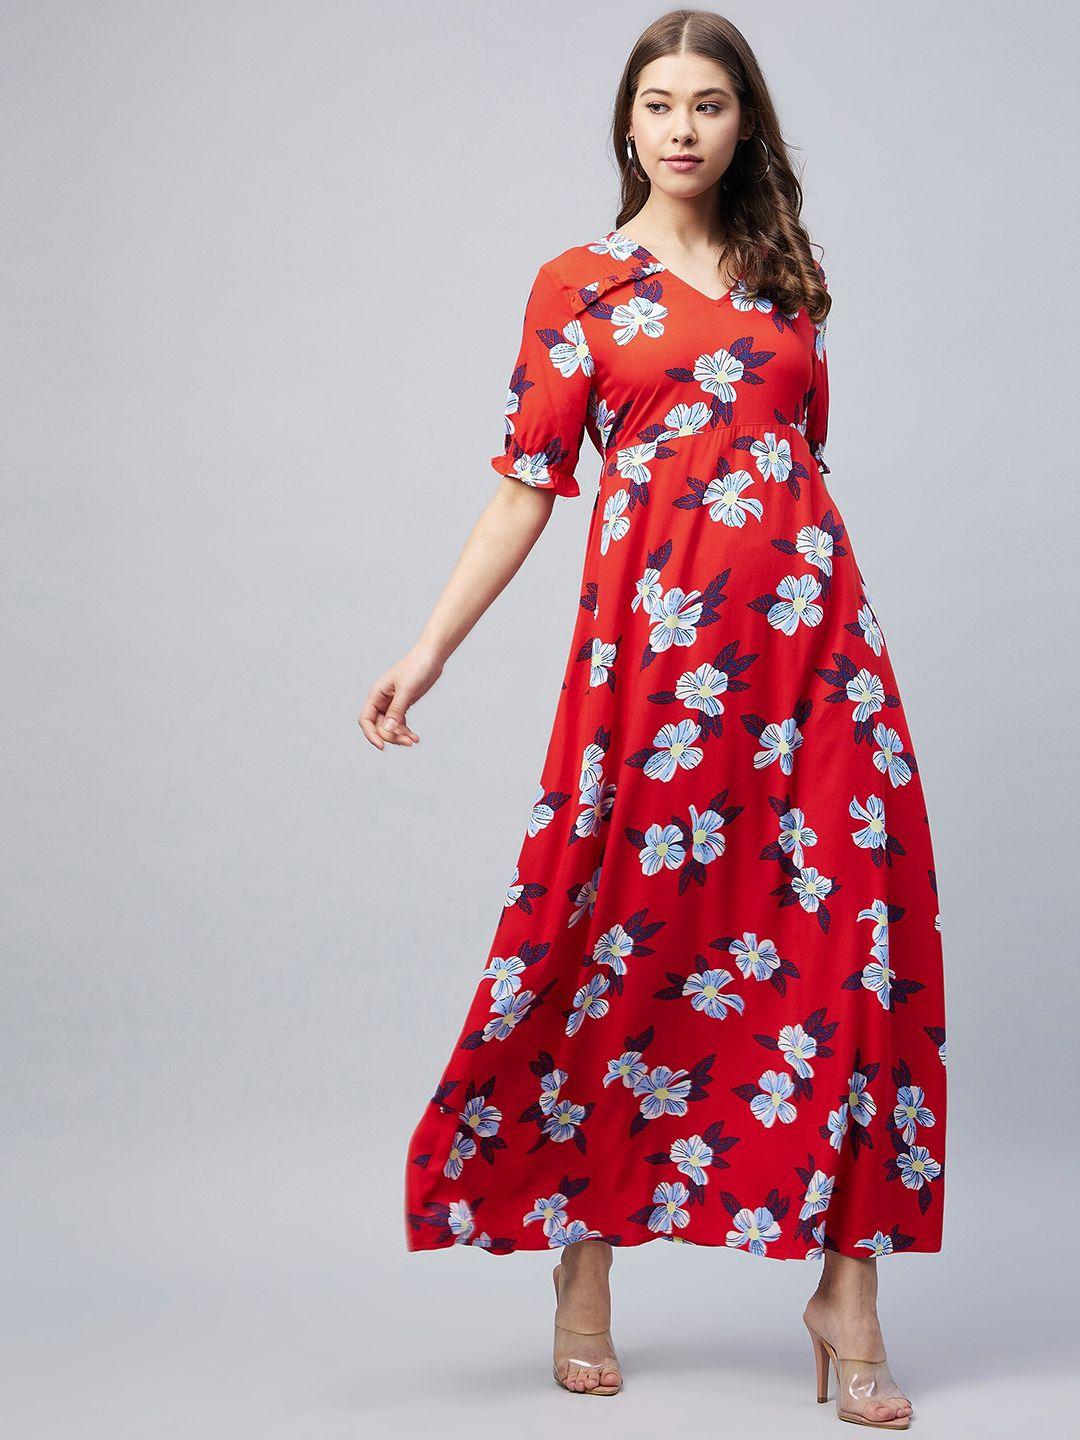 stylestone red floral printed maxi dress